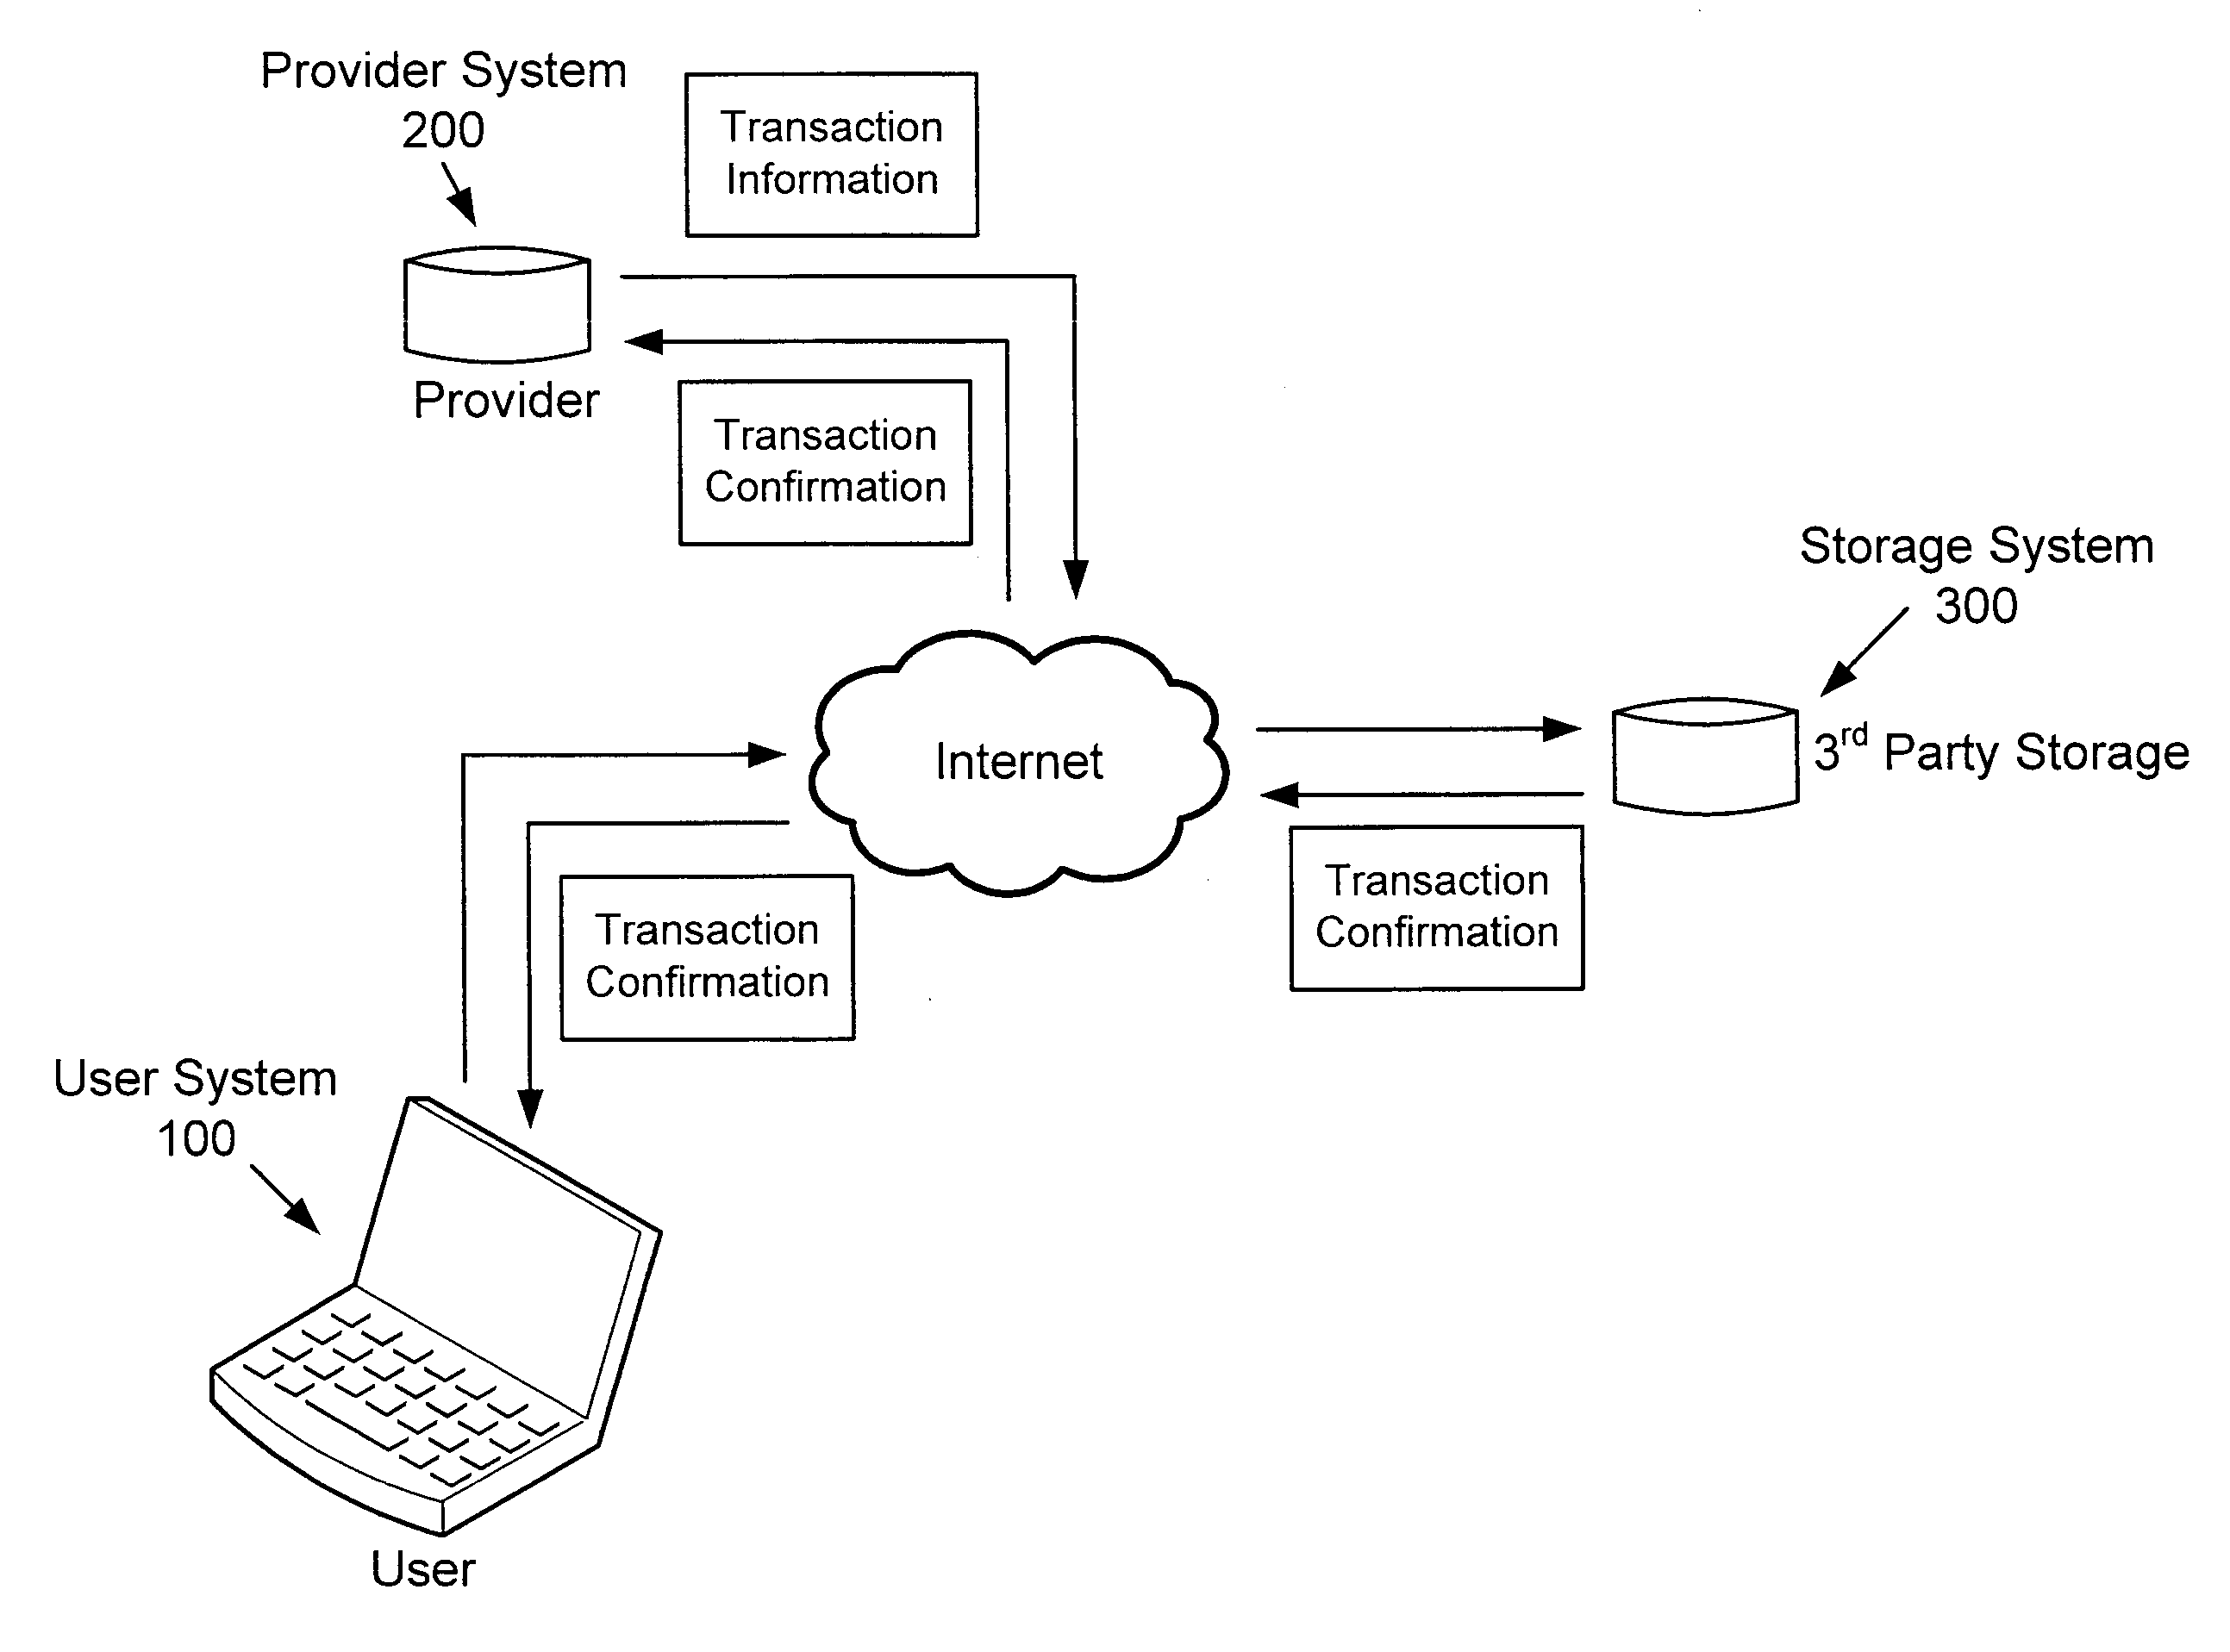 Archiving system and process for transaction records